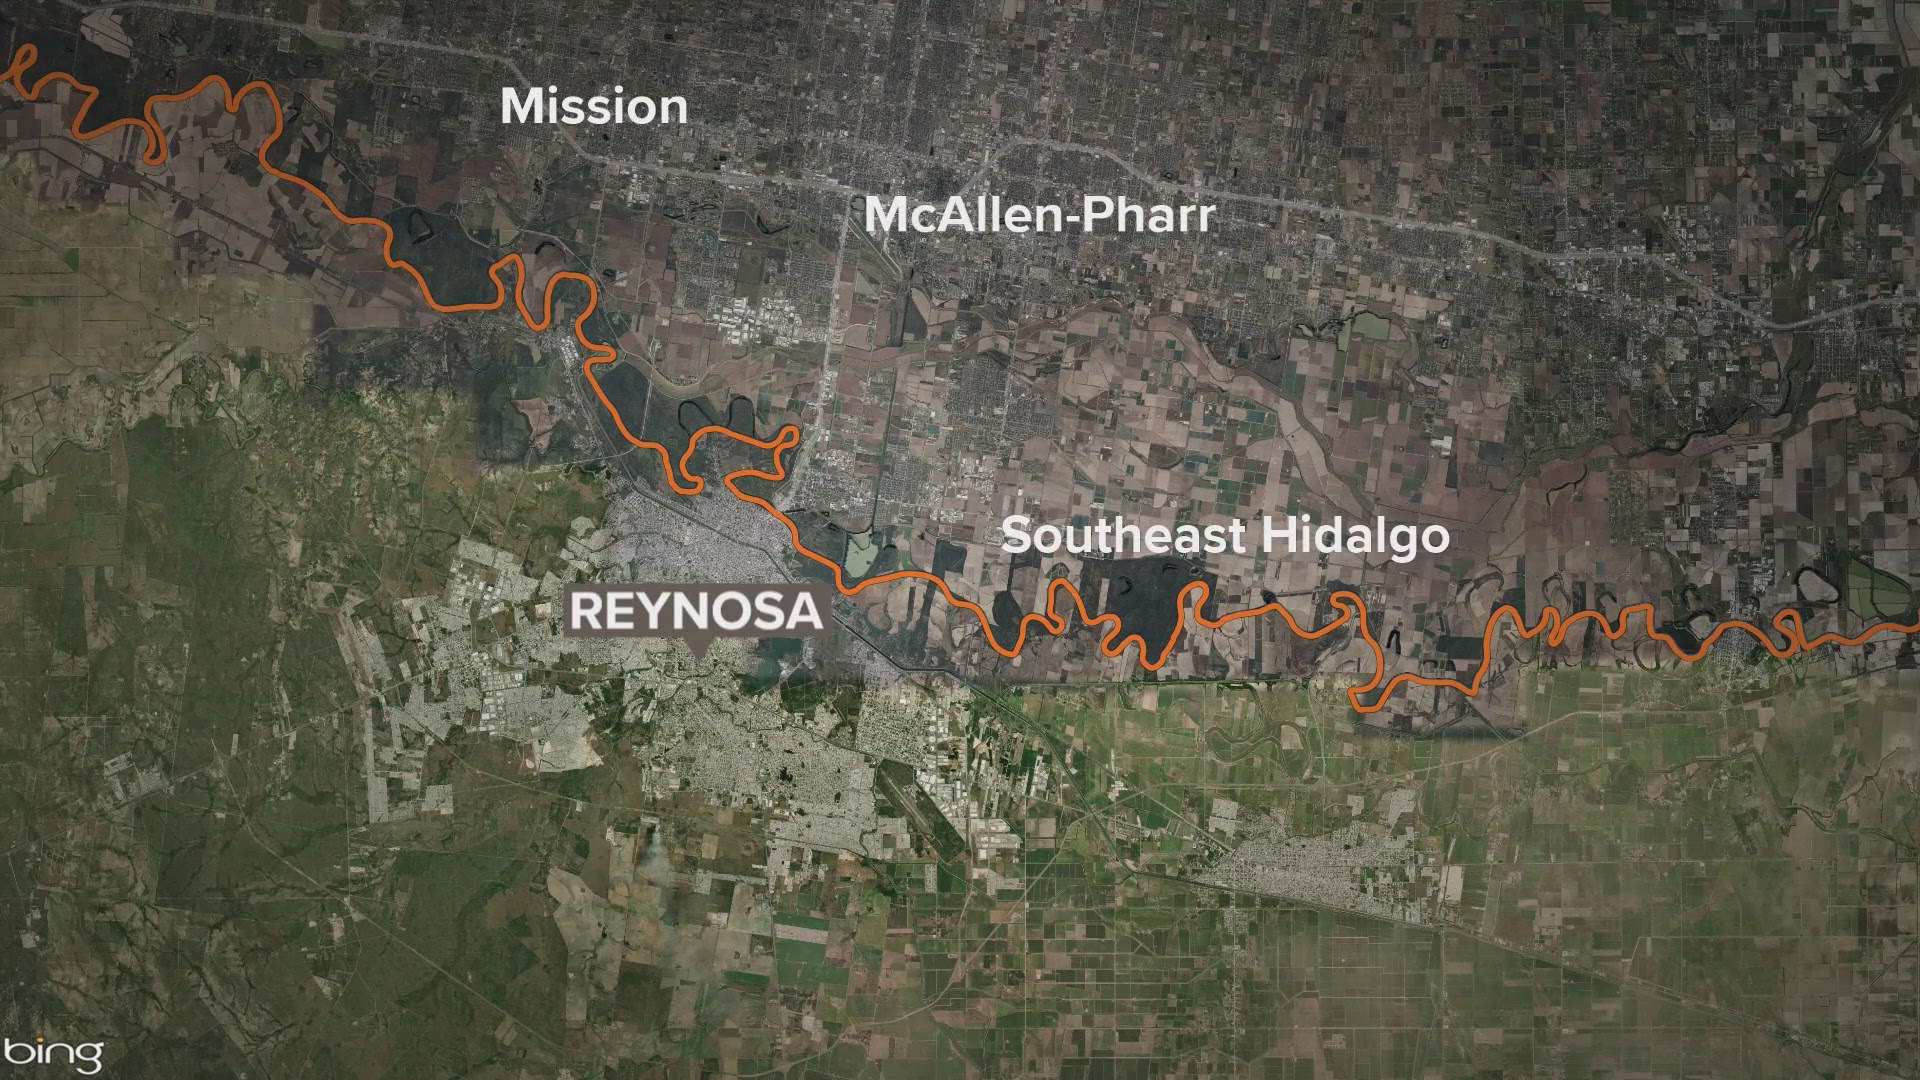 People with connections to the United States are being targeted by kidnappers in Reynosa, a border town that site about 20 miles south of McAllen.